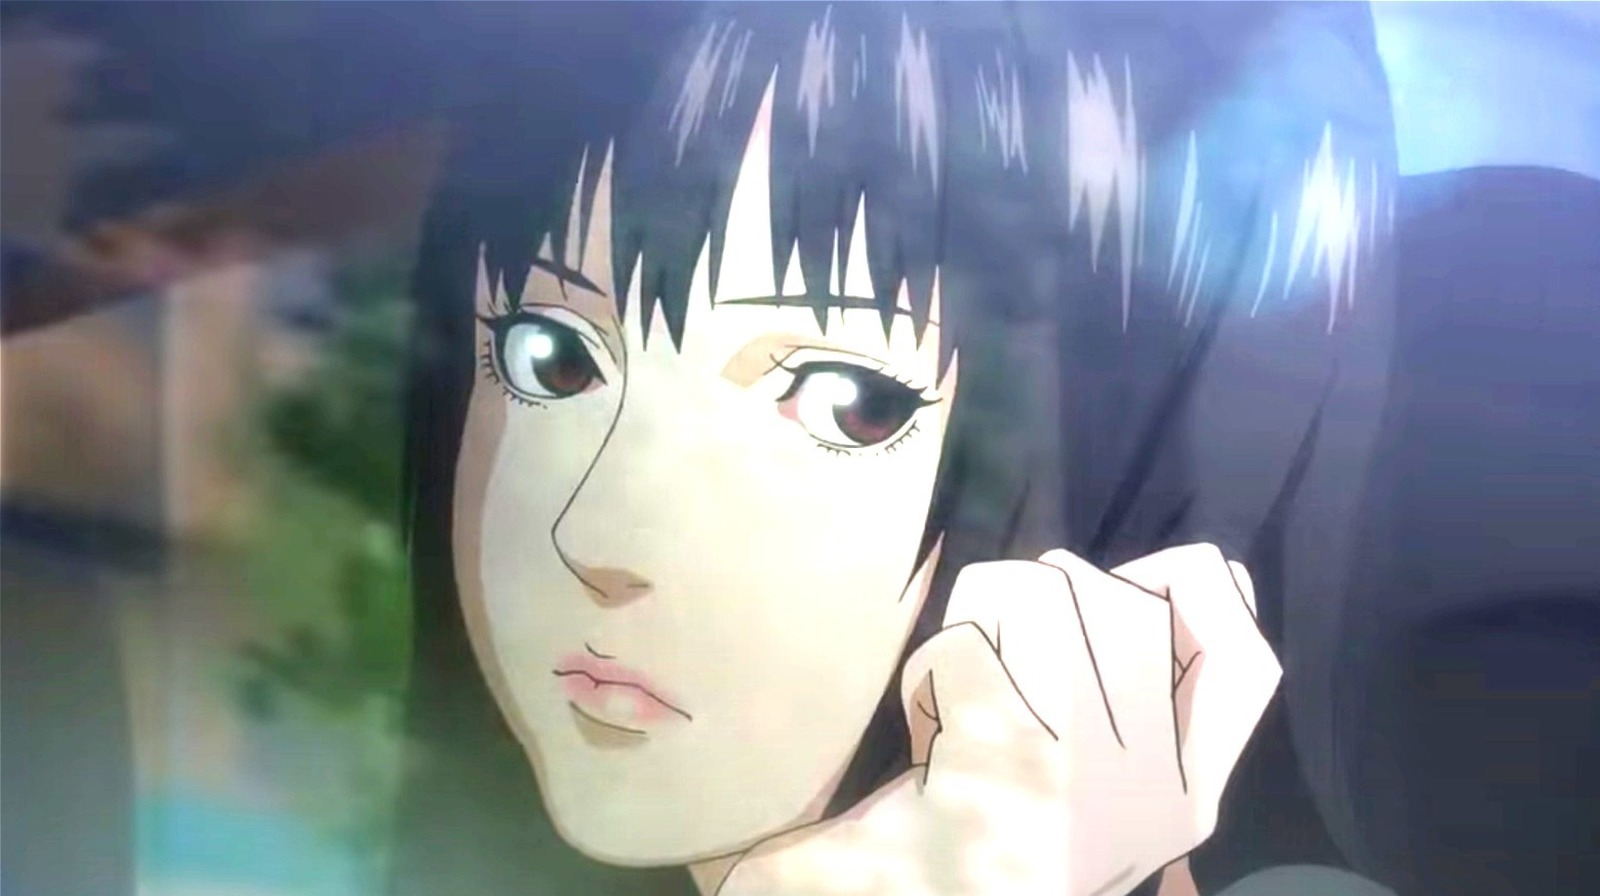 Inuyashiki Anime Reveals More Cast, Ending Theme Song - News